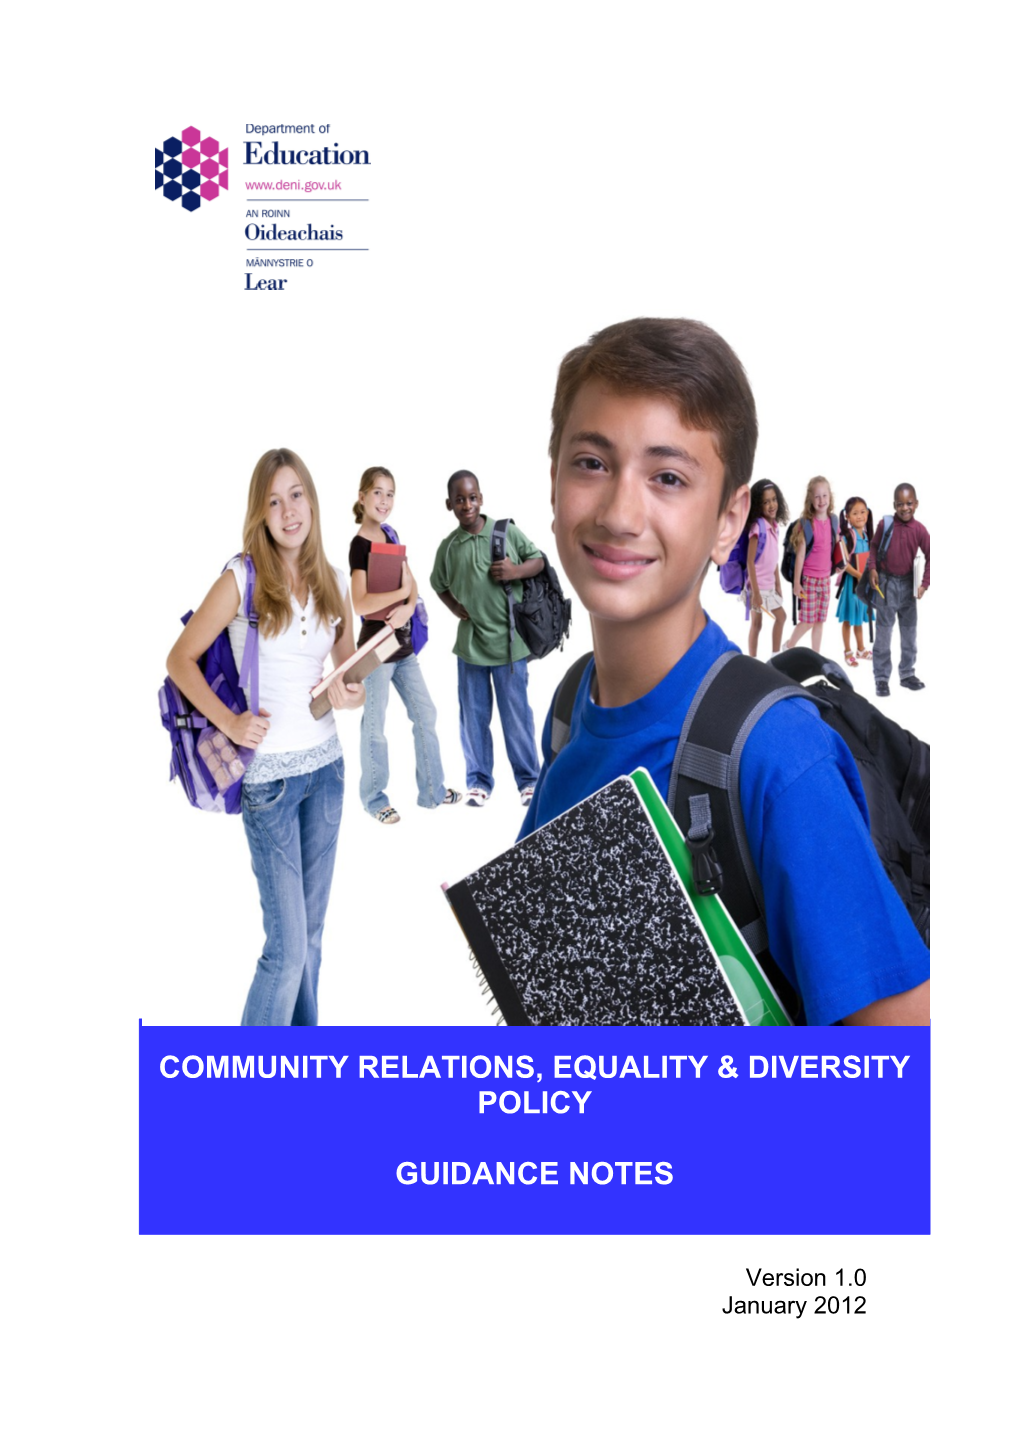 Community Relations & Diversity Policy